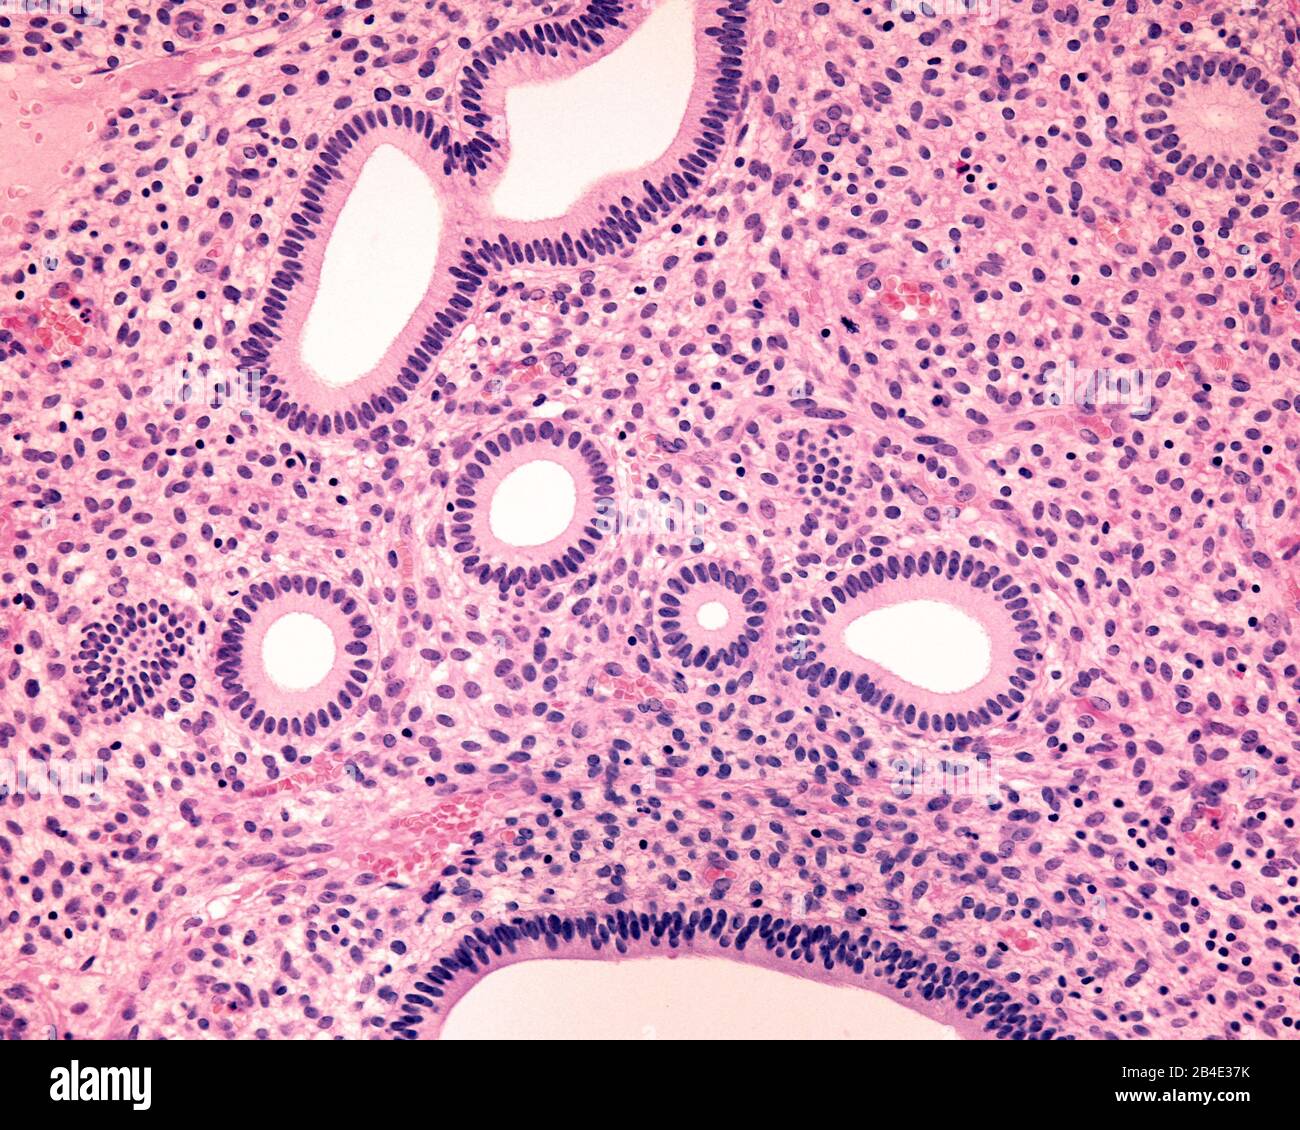 Human endometrium. Proliferative phase. Several tubular endometrial glands are cross sectioned showing their simple columnar epithelium. Among them, t Stock Photo